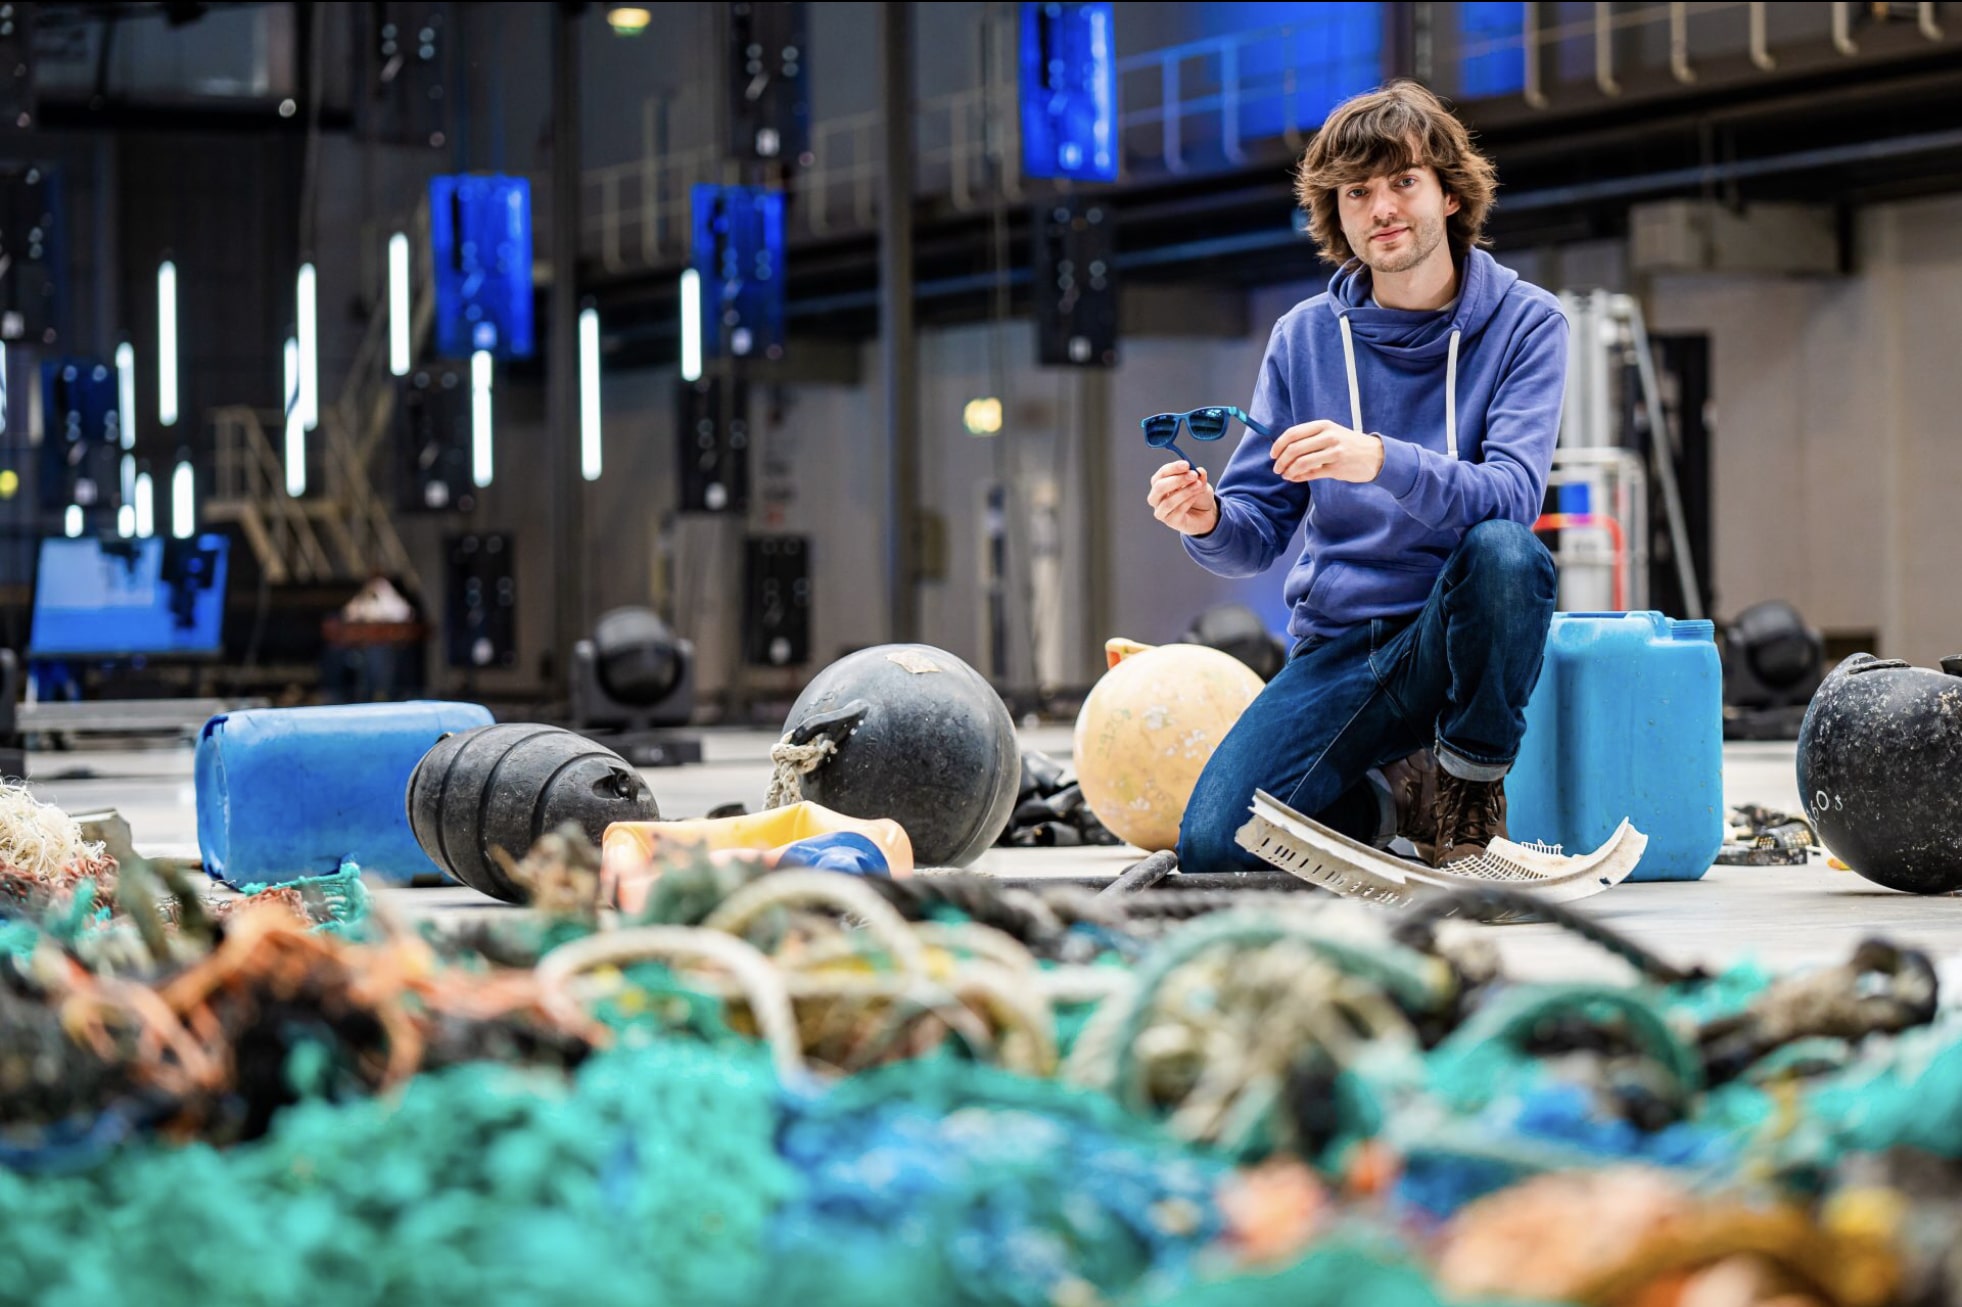 In 2011, aged 16, Slat came across more plastic than fish while diving in Greece. He decided to devote a high school project for deeper investigation into ocean plastic pollution and why it was considered impossible to clean up. He later came up with the idea to build a passive system, using the circulating ocean currents to his advantage, which he presented at a TEDx talk in Delft in 2012.